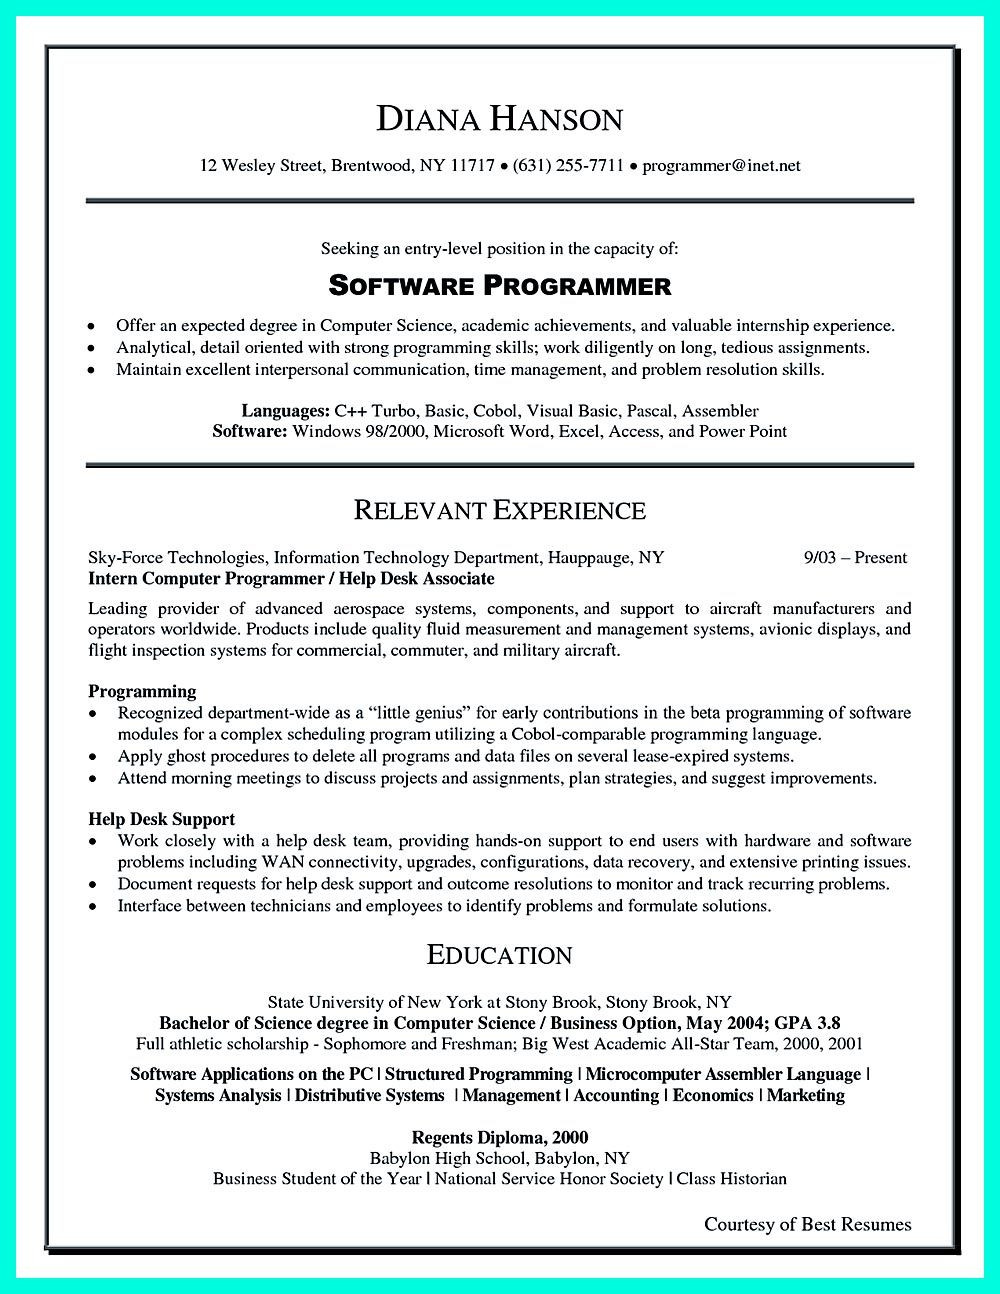 Sample Resume for Diploma In Computer Science What You Will Include In the Computer Science Resume Depends On …